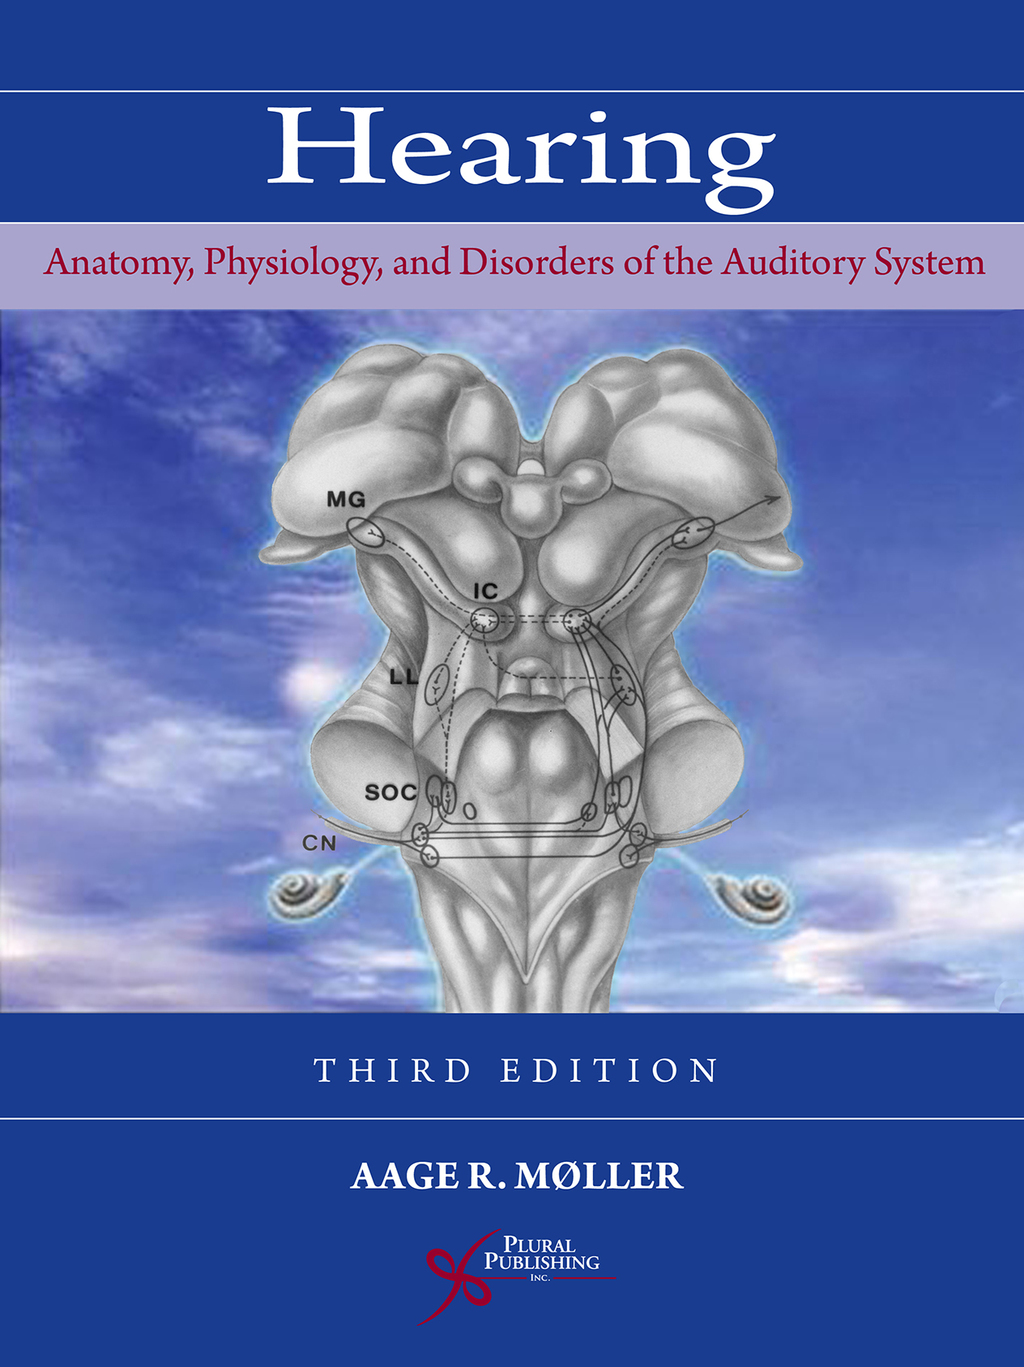 Hearing: Anatomy  Physiology  and Disorders of the Auditory System  Third Edition (eBook) - Aage MÃ¸ller